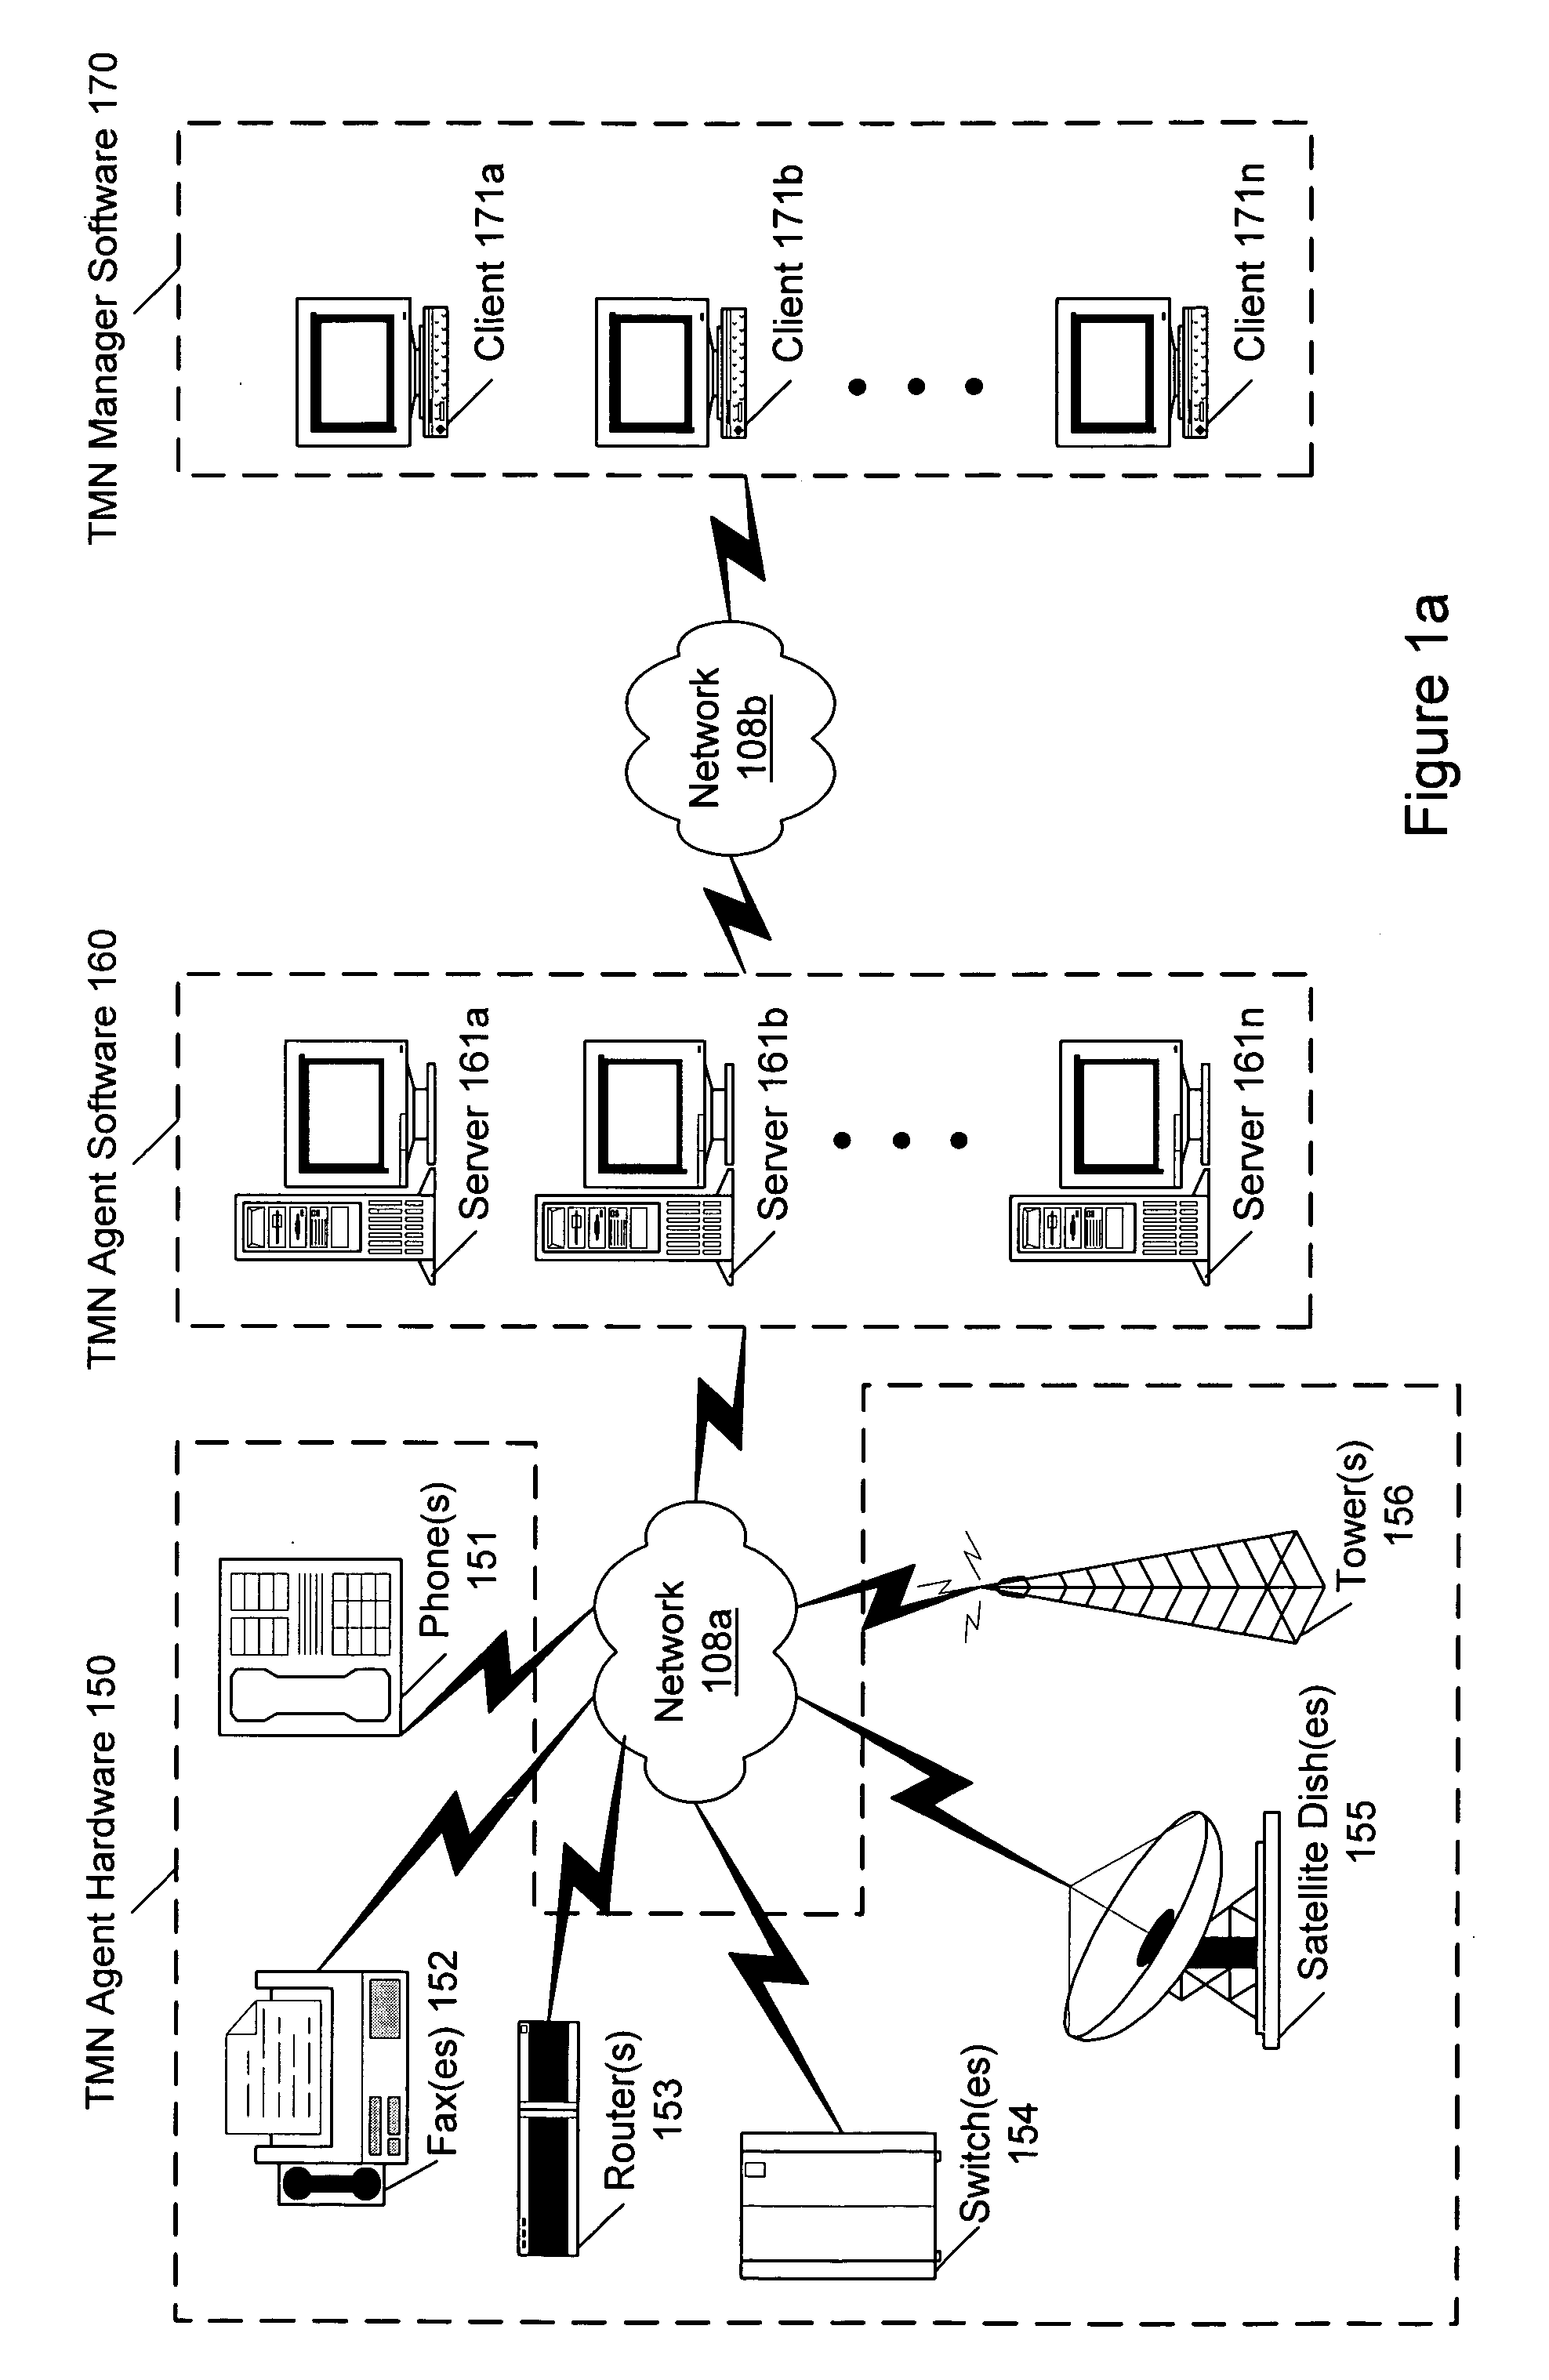 System and method for event subscriptions for CORBA gateway